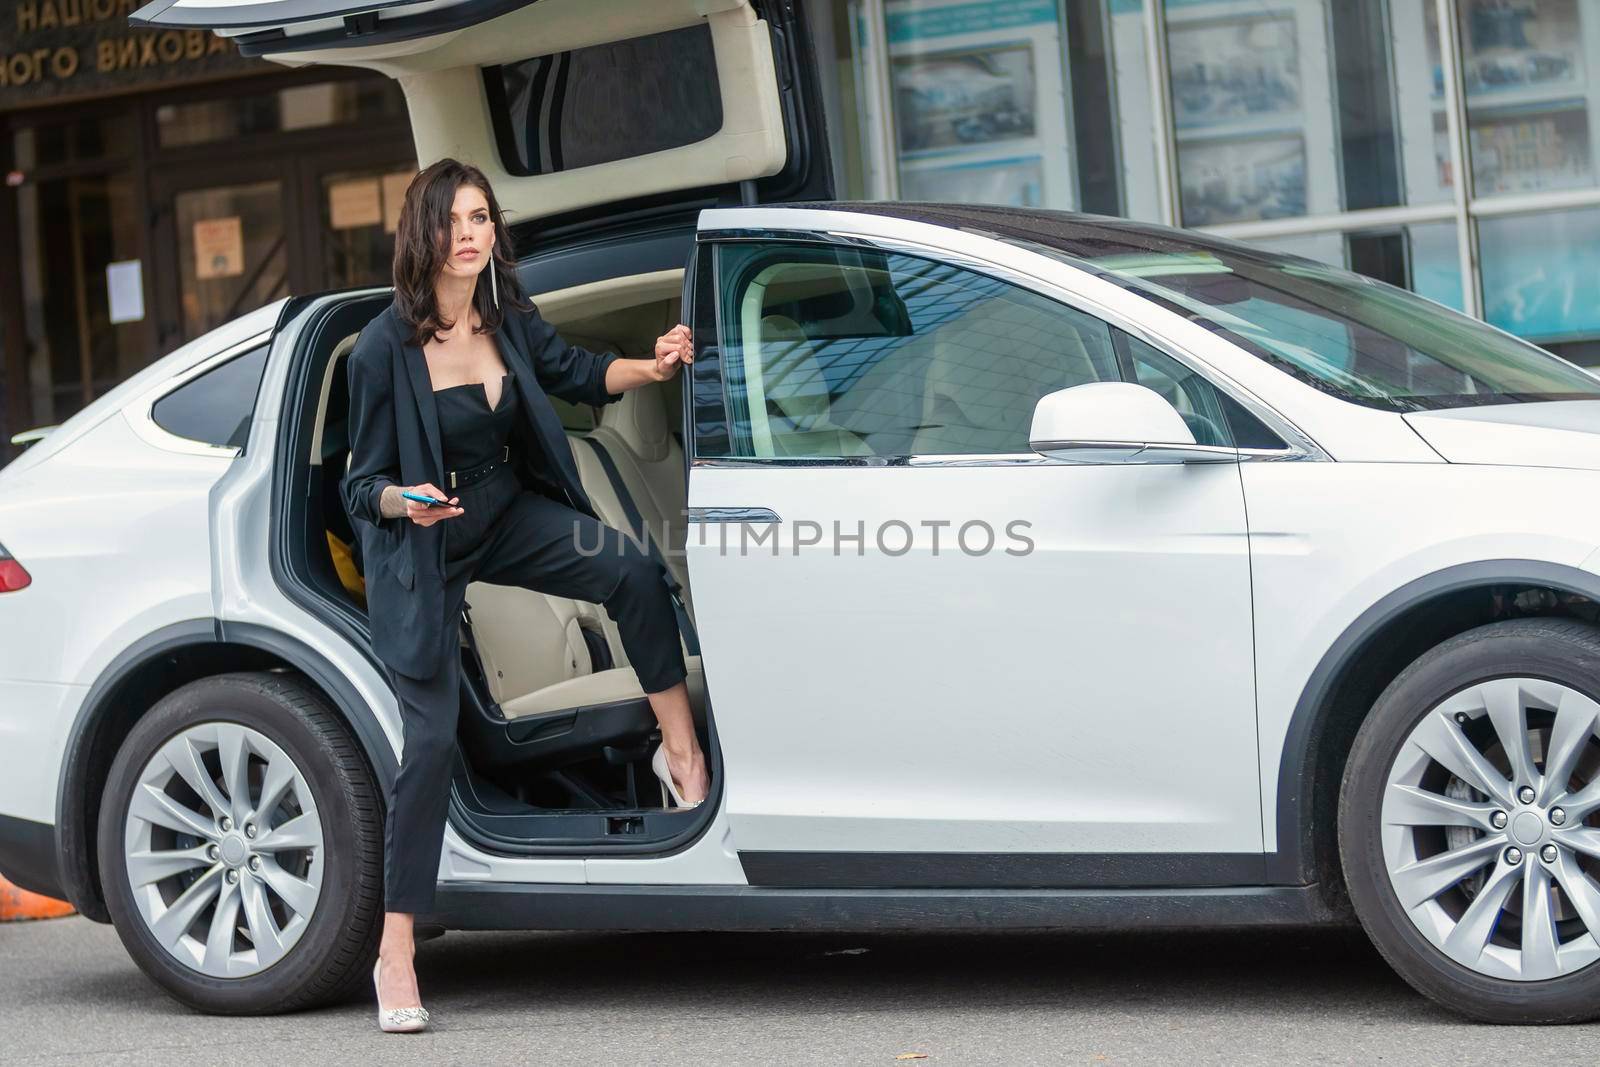 a woman in a business suit sits in a car by zokov